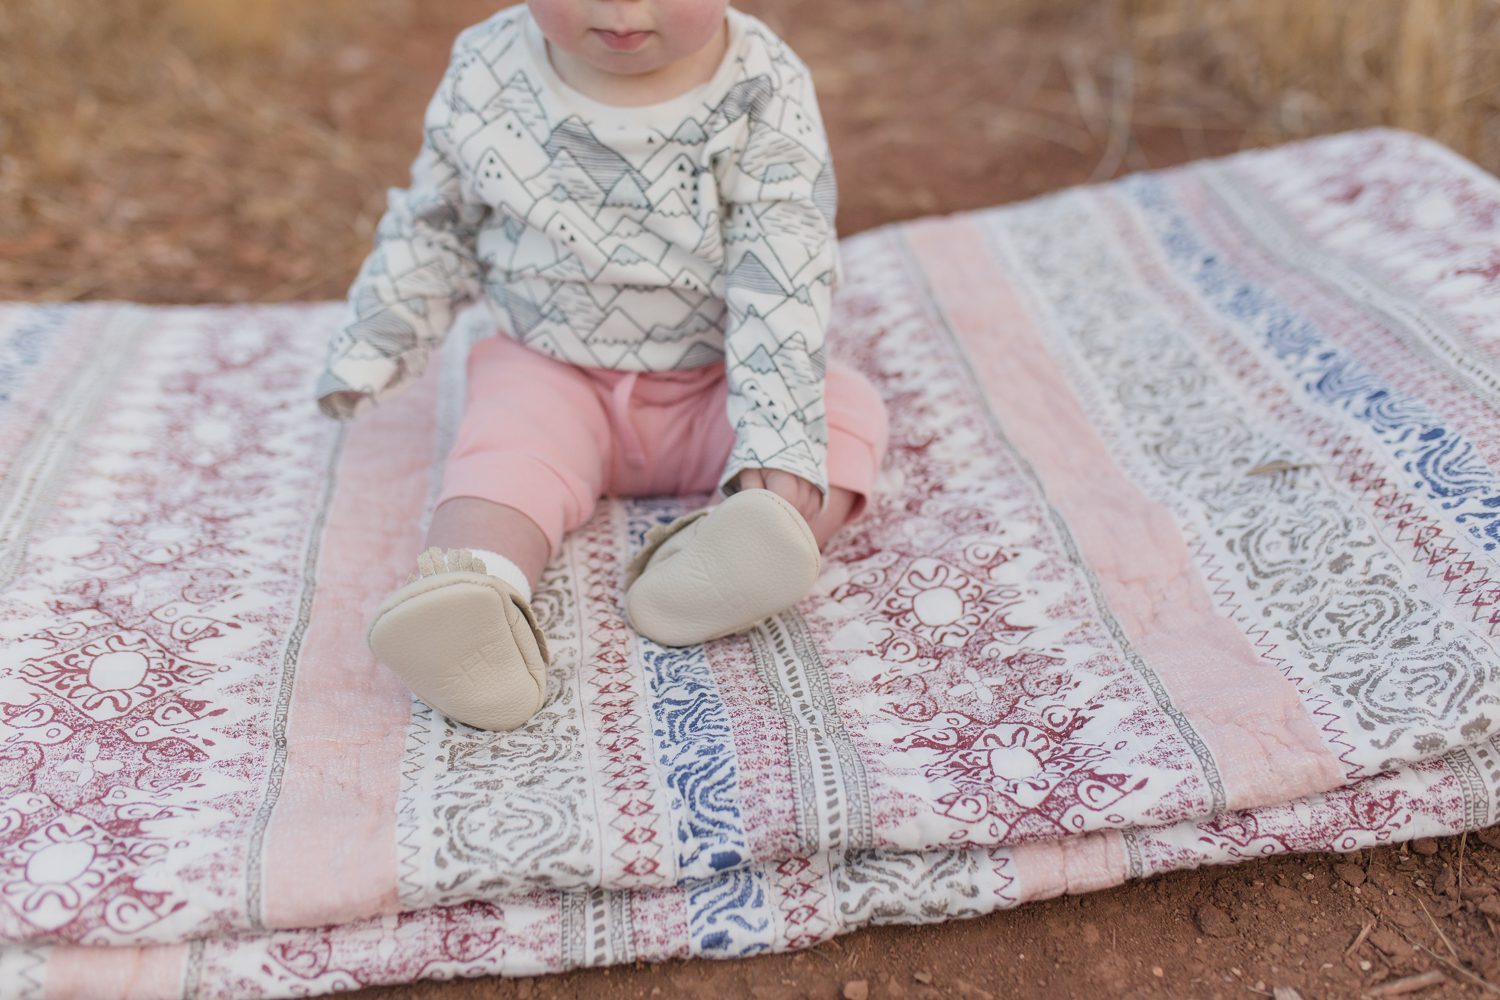 Baby Pictures, Family Photographer, Jen Lints Photography, Garden of the Gods